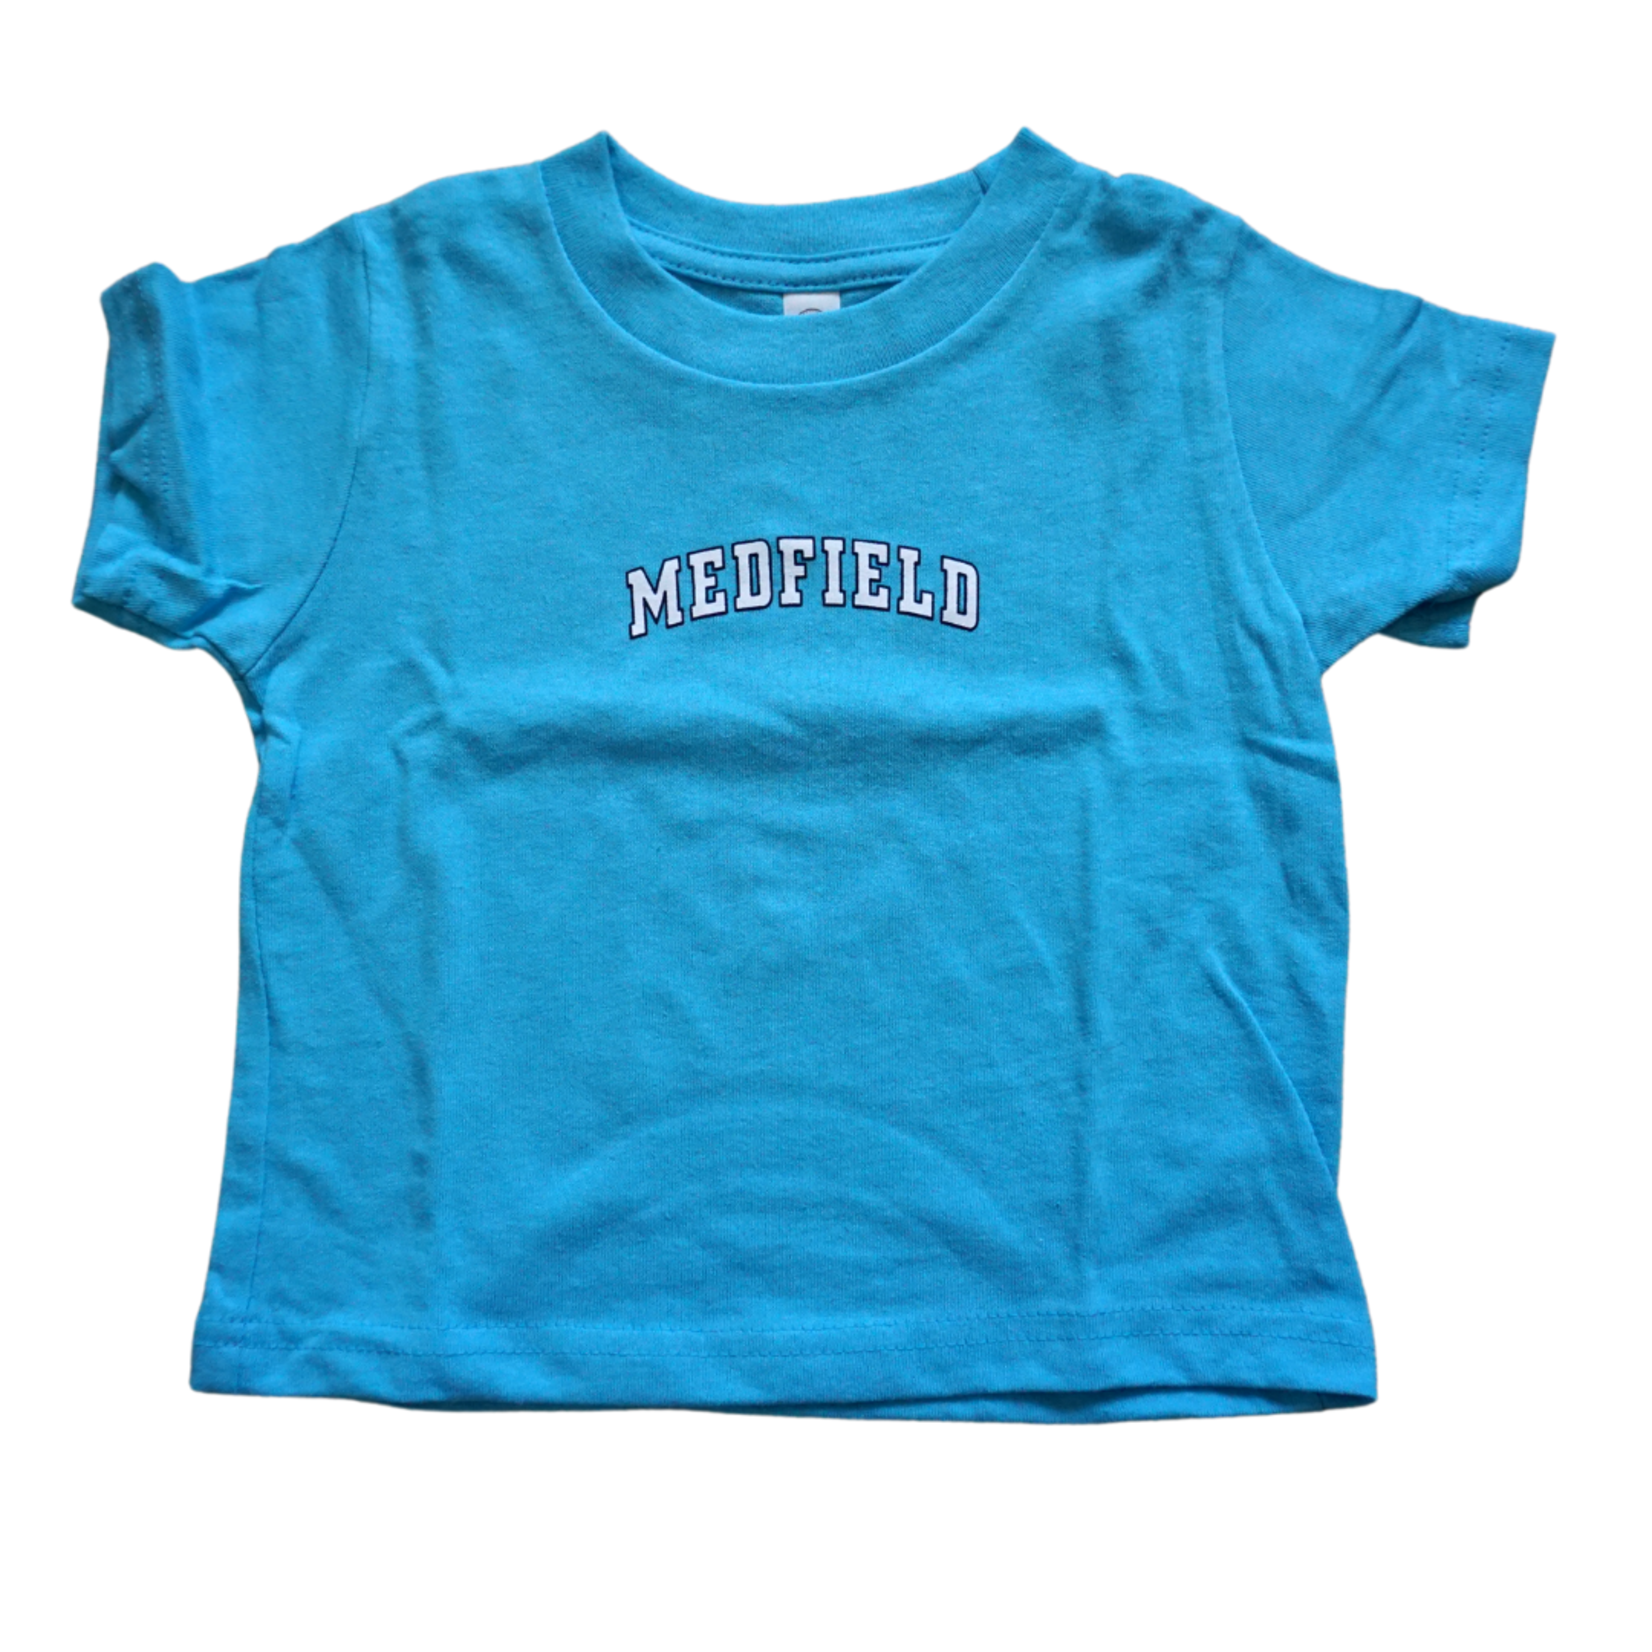 Medfield Toddler Shirts